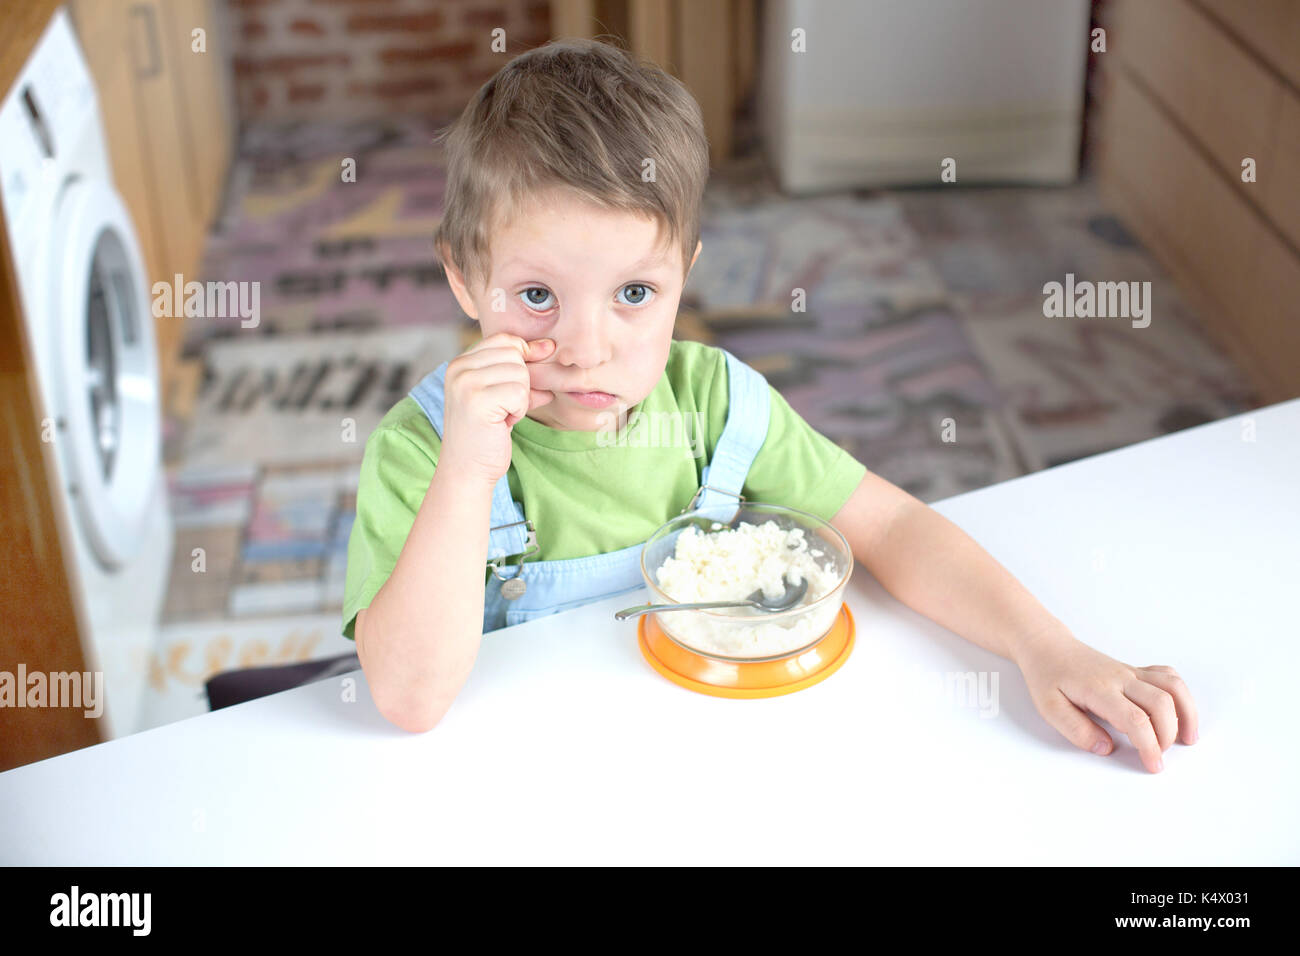 Boy with meal at table Stock Photo